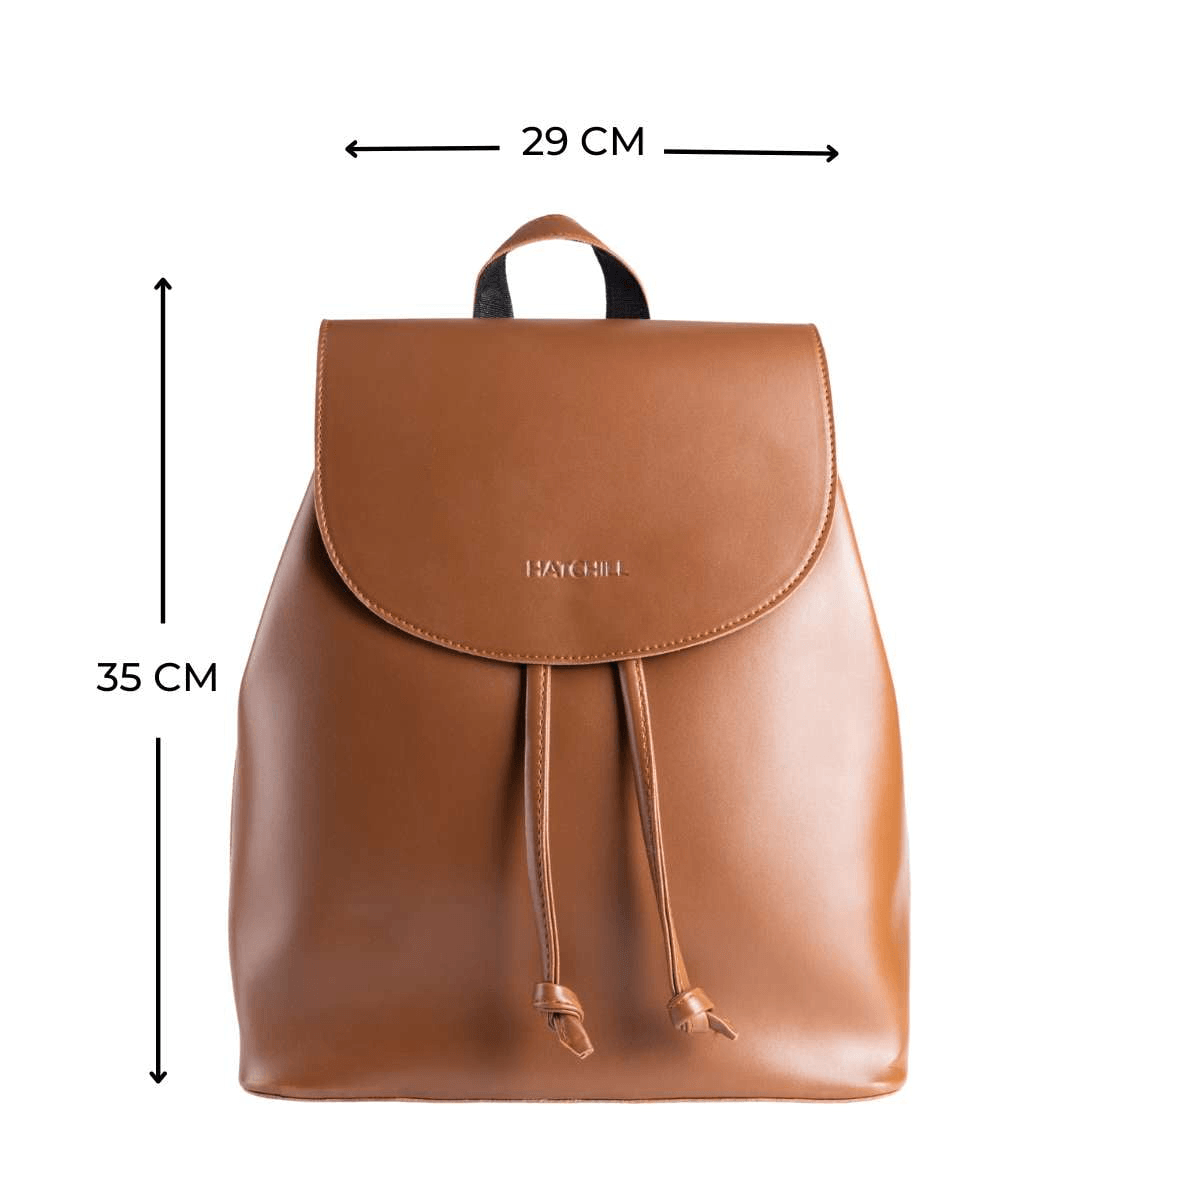 Leather backpack - Clay Brown - Hatchill